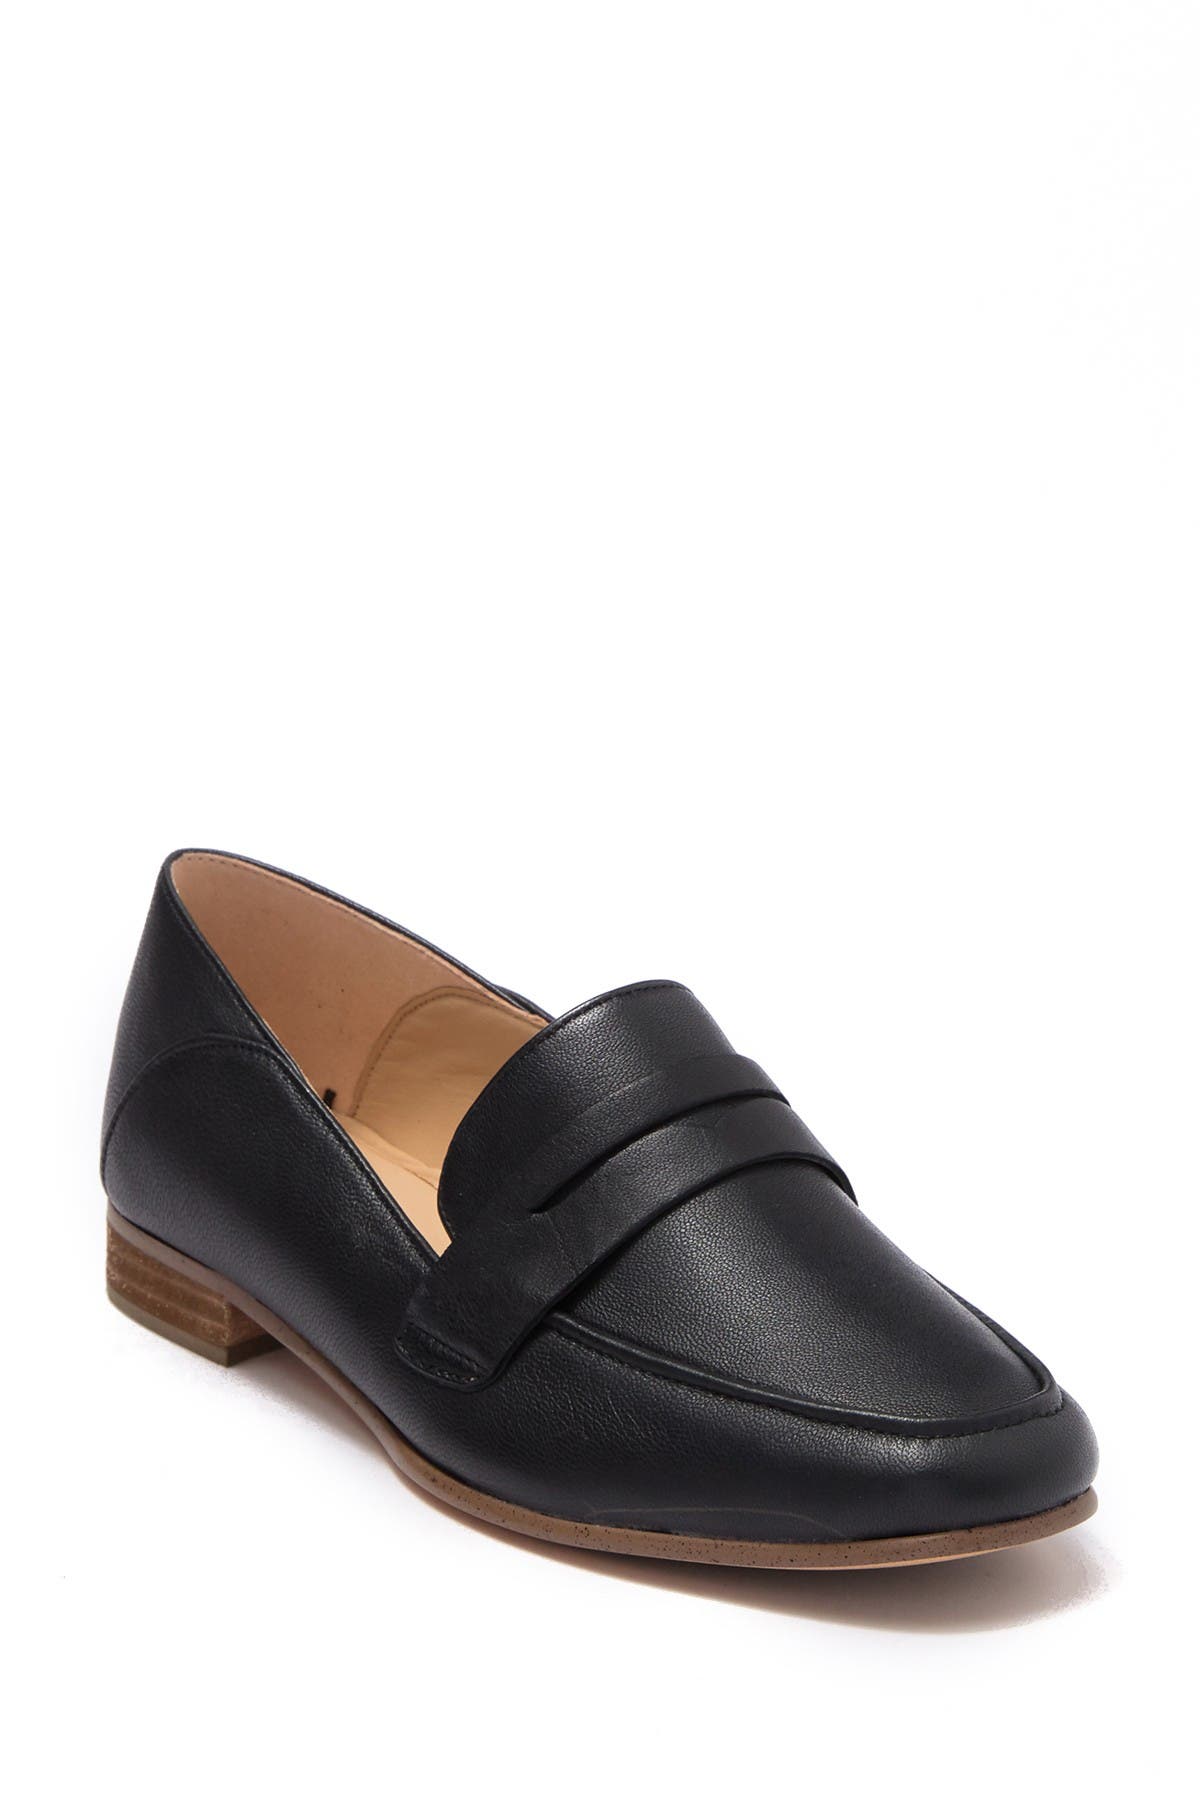 Clarks | Pure Iris Penny Loafer 